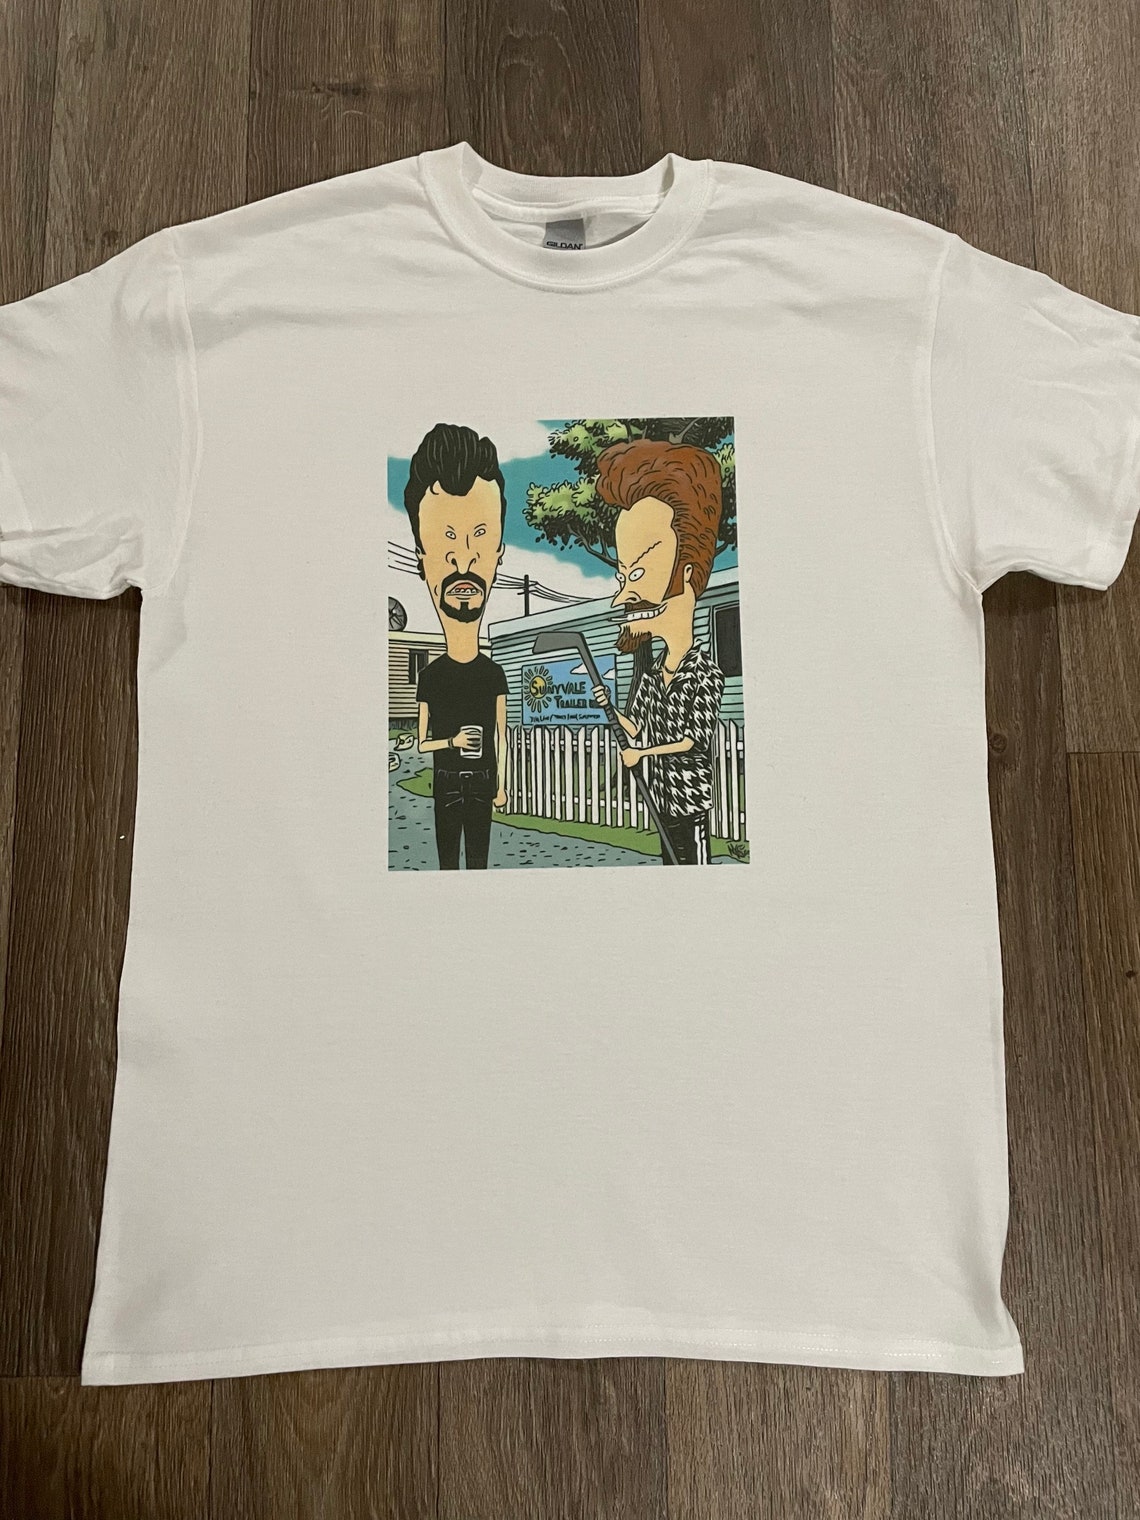 Beavis and Butthead trailer park boys graphic t shirt | Etsy